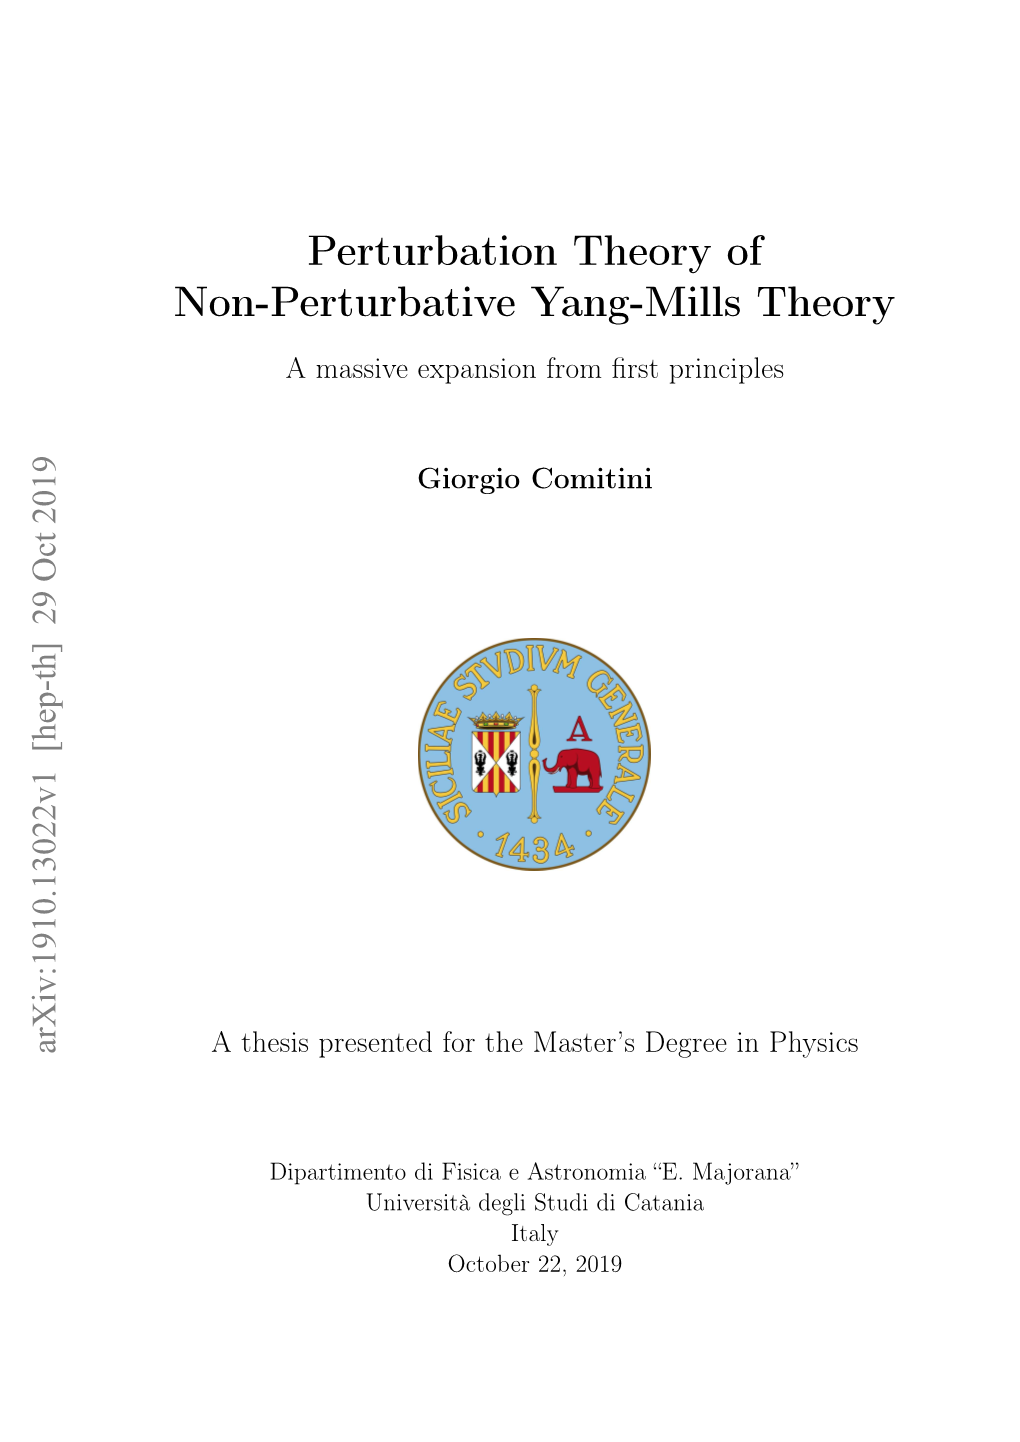 Perturbation Theory of Non-Perturbative Yang-Mills Theory: a Massive Expansion from First Principles